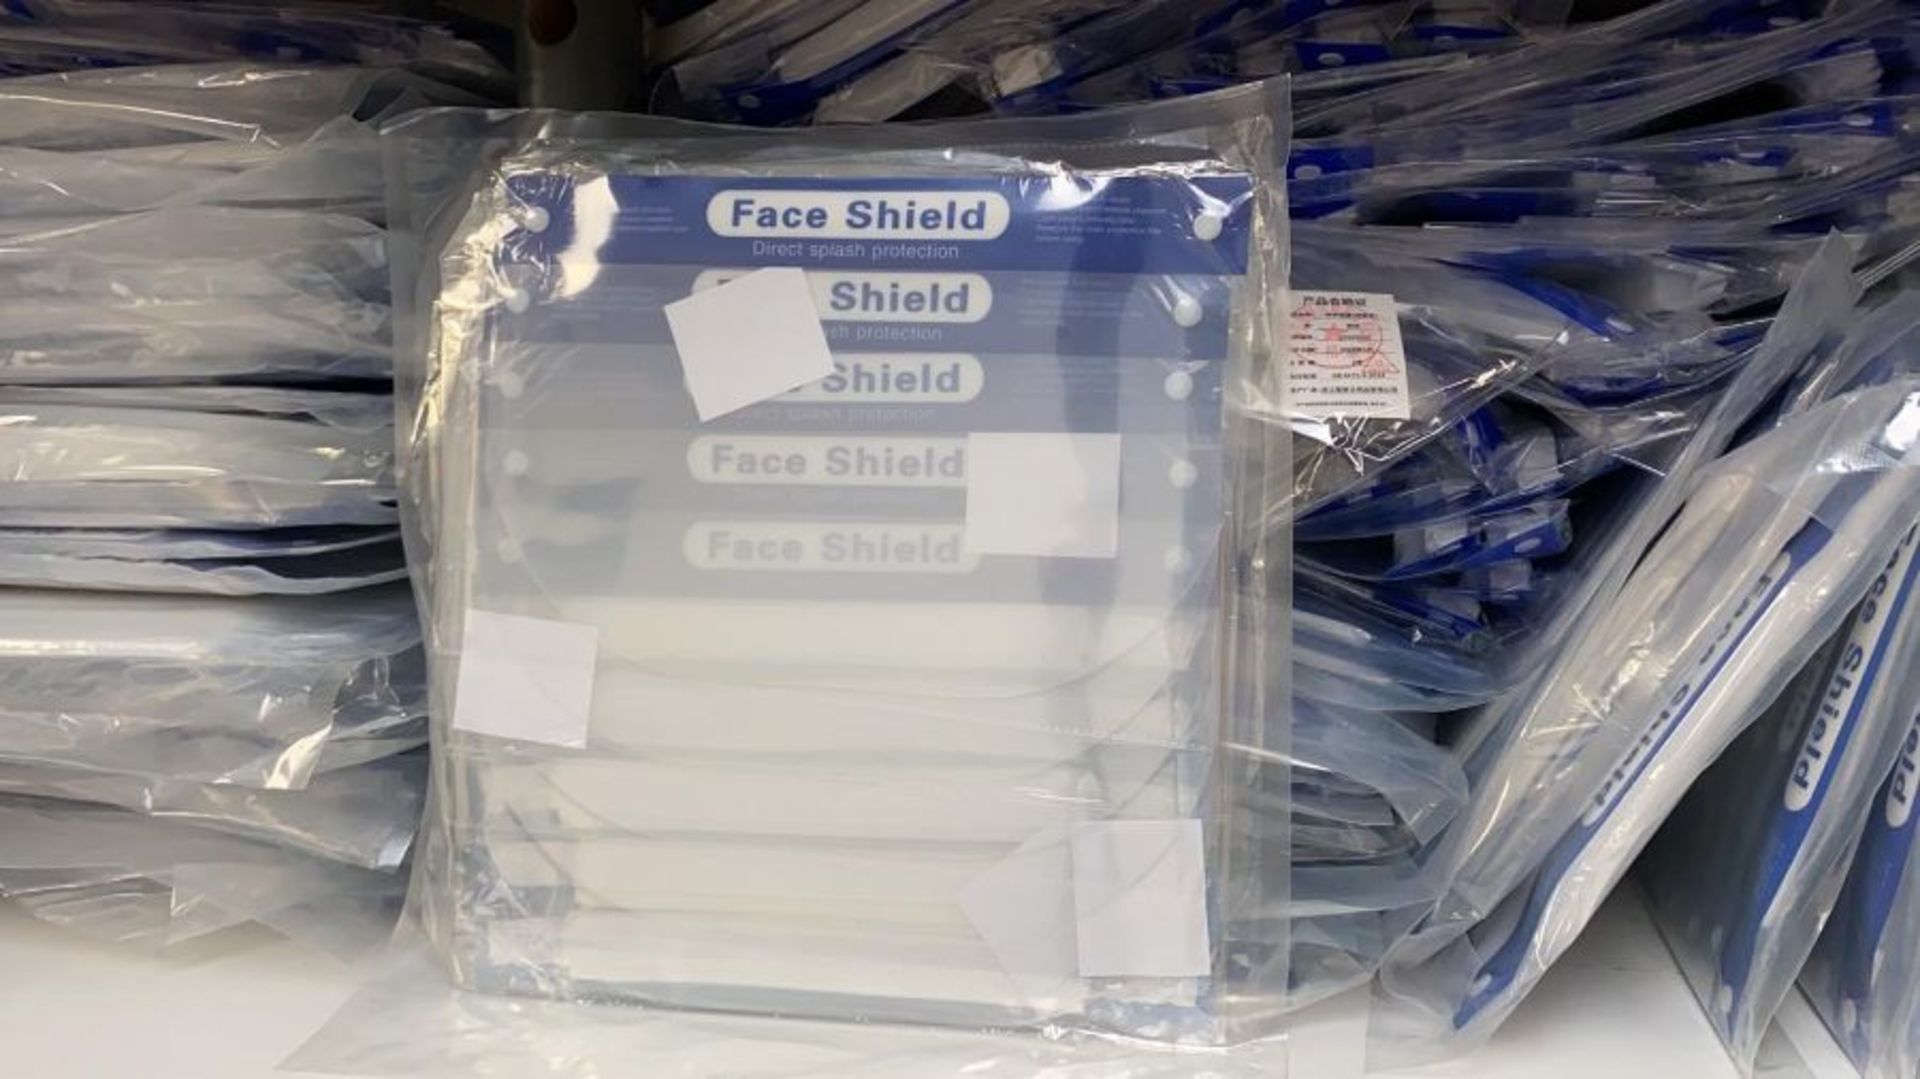 Face shields - 10pk (Quantity 350). Face shields are used as a barrier protection for the facial